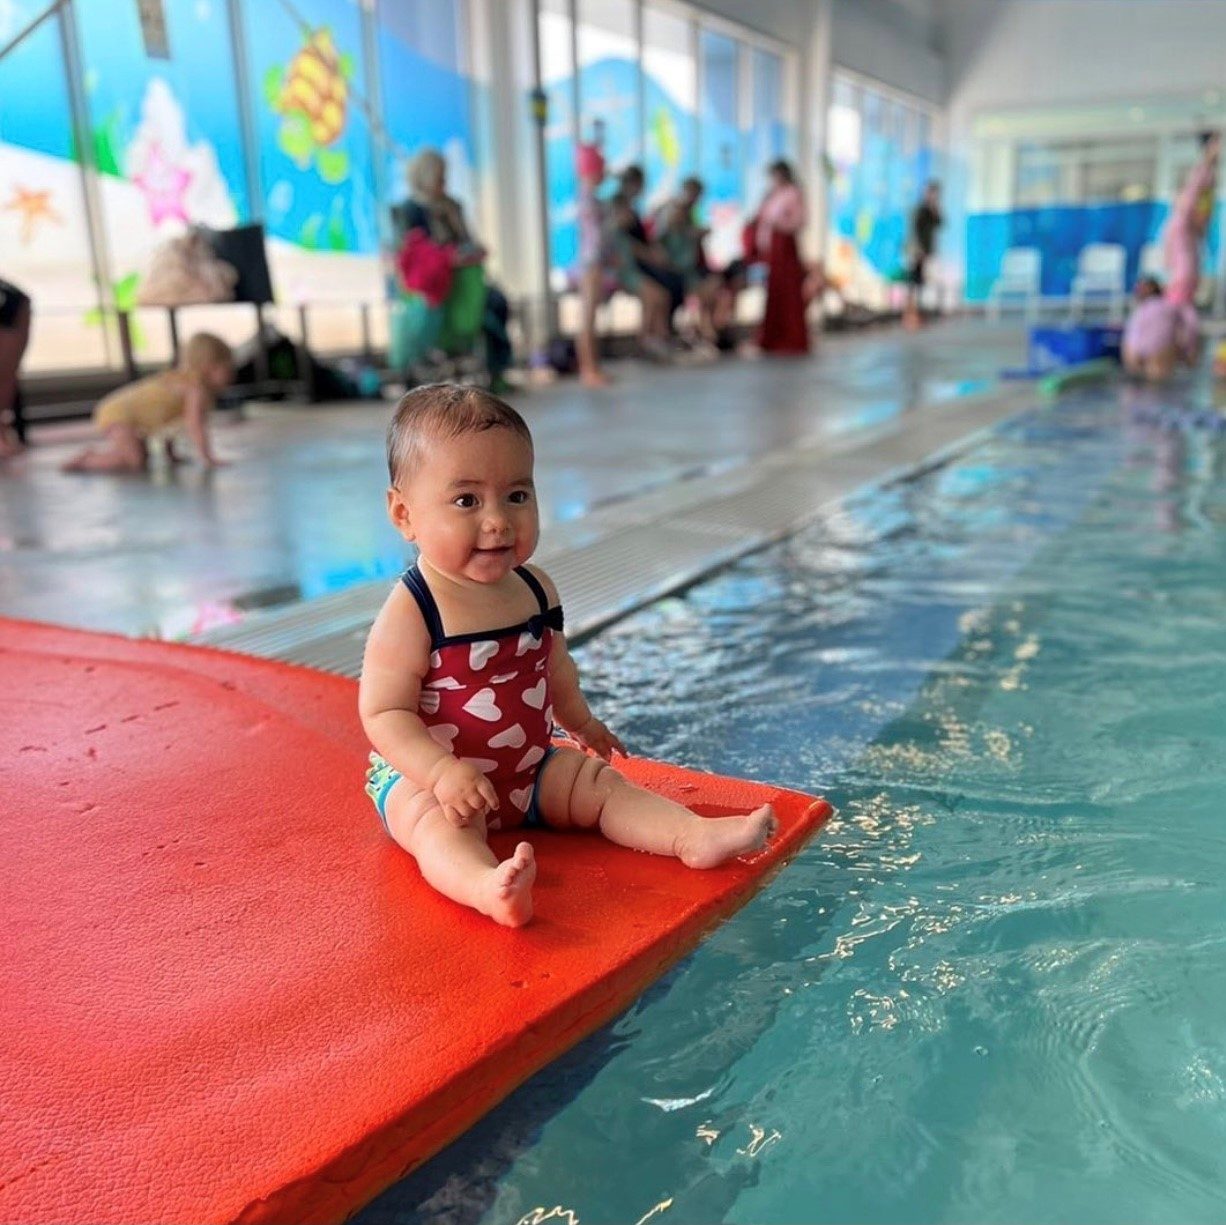 Baby on floating mat in swimming pool